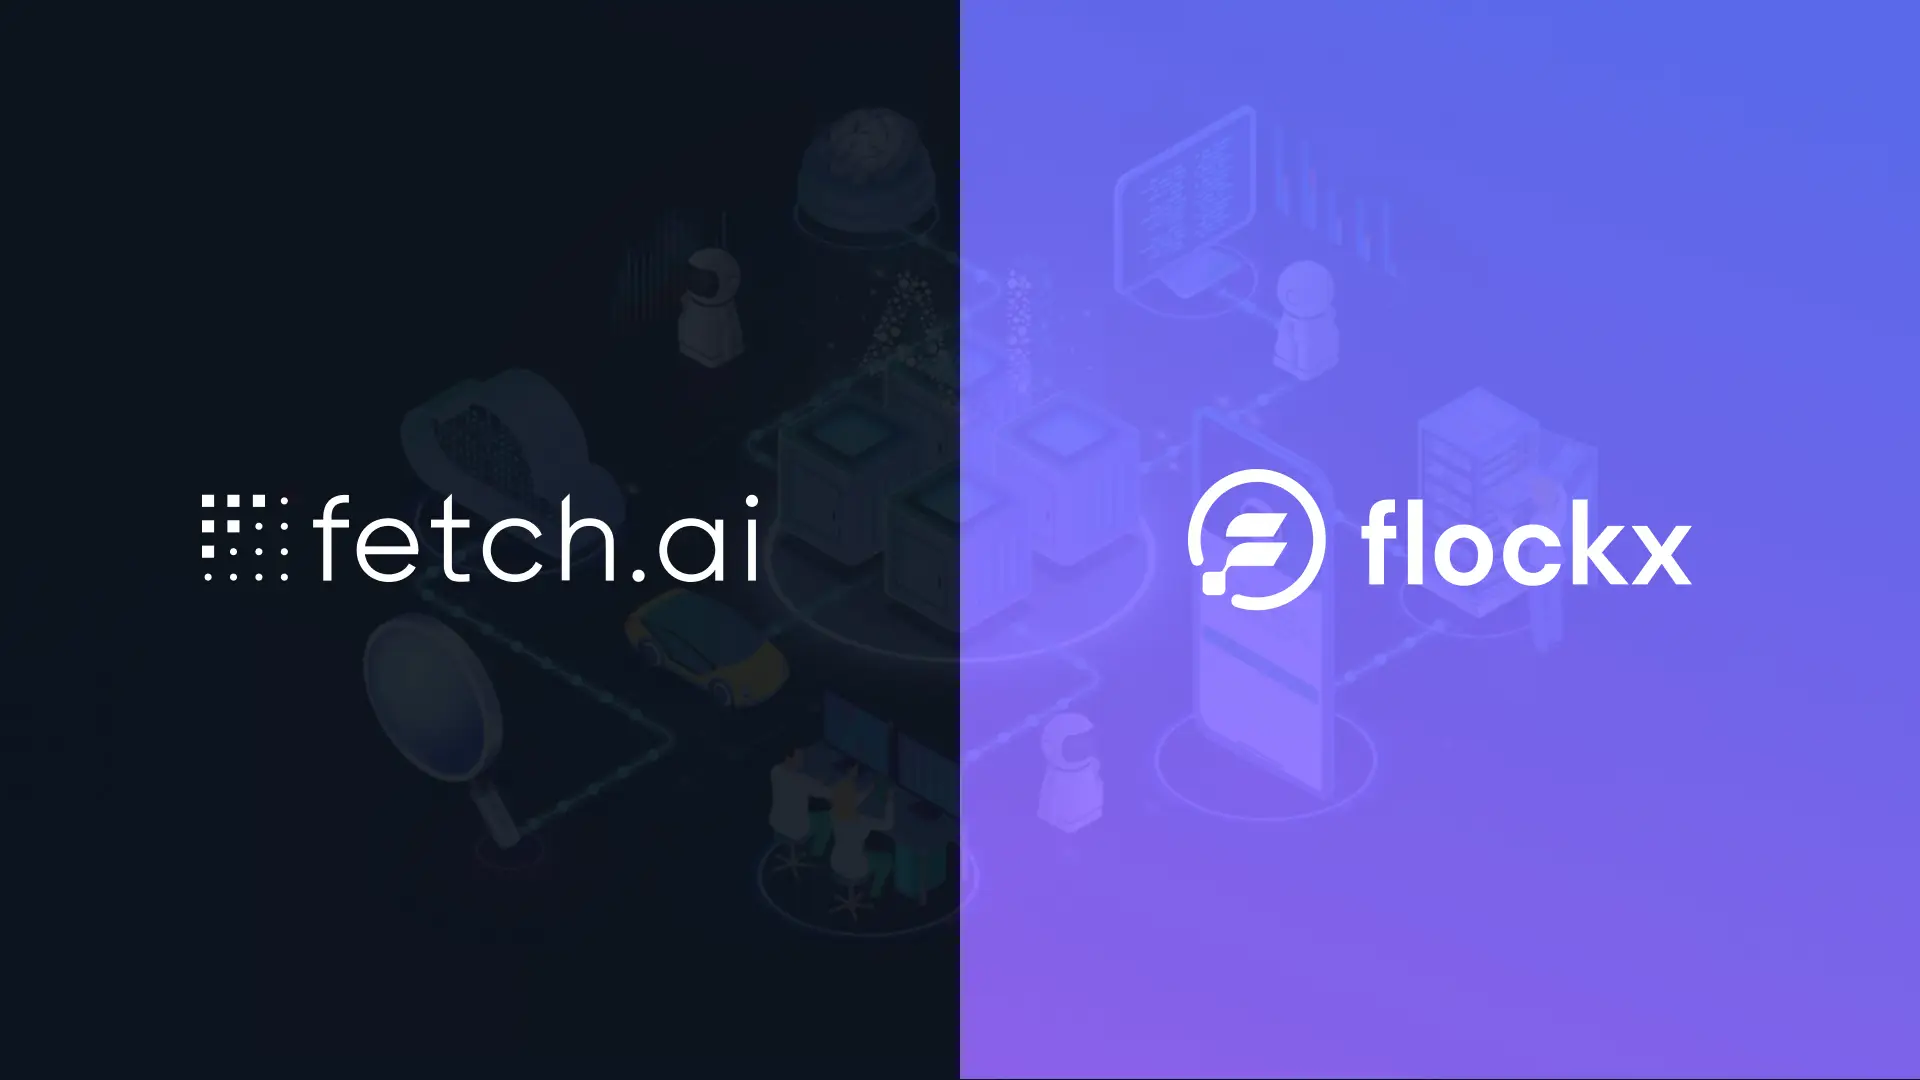 Fetch.ai and flockx collaboration banner